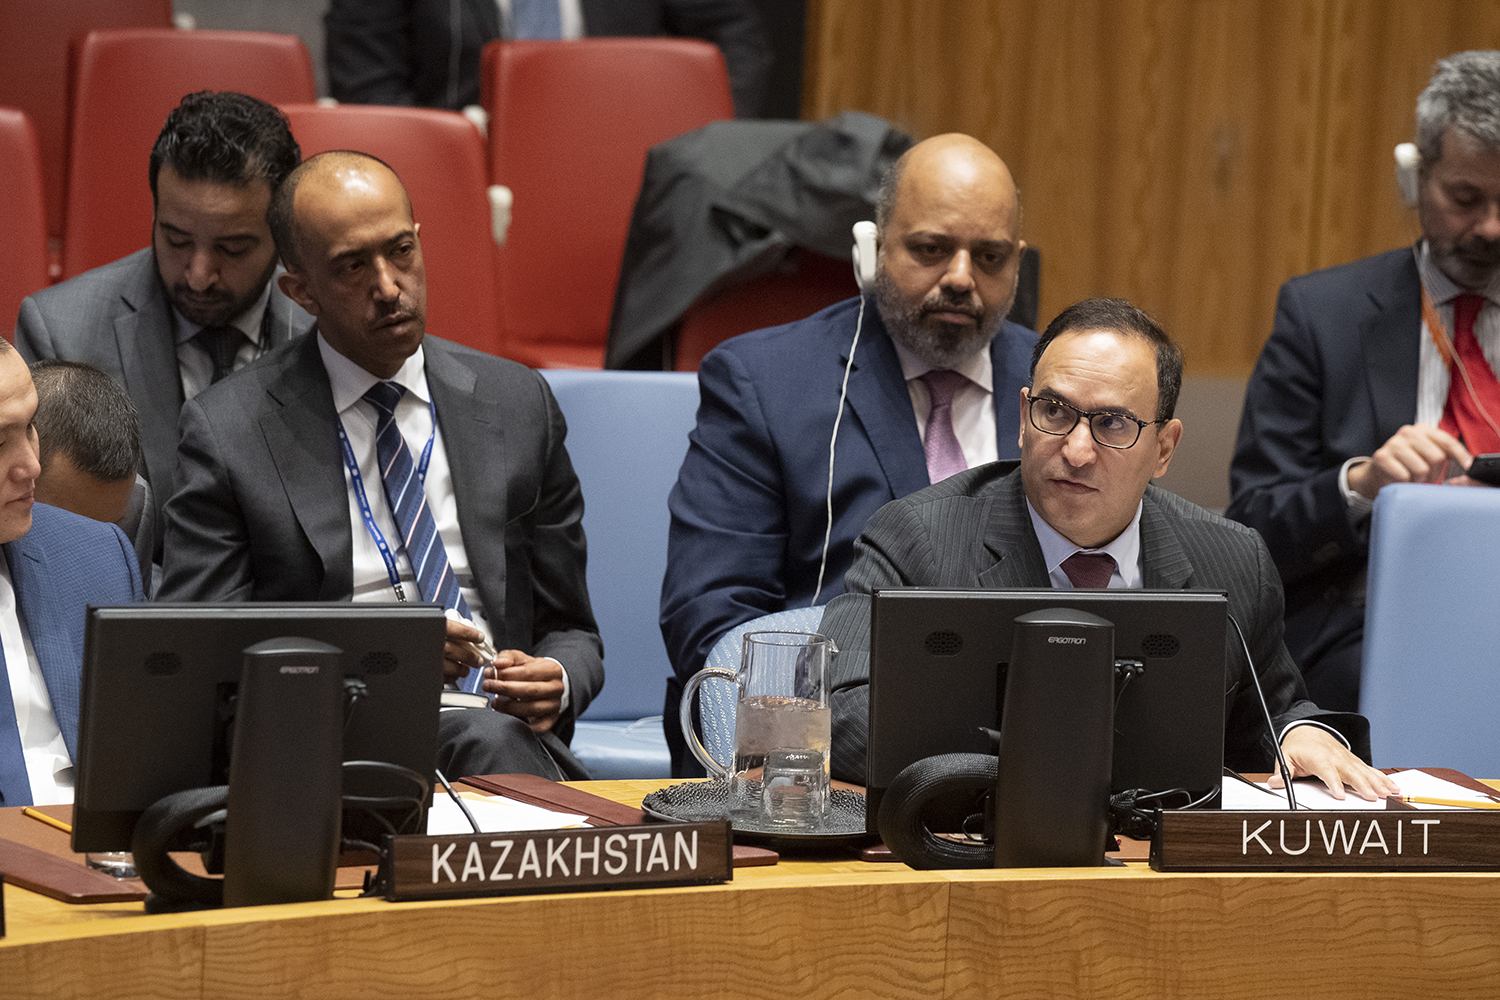 Permanent Representative to the UN, Ambassador Mansour Al-Otaibi addresses the Security Council session to discuss the situation in Yemen